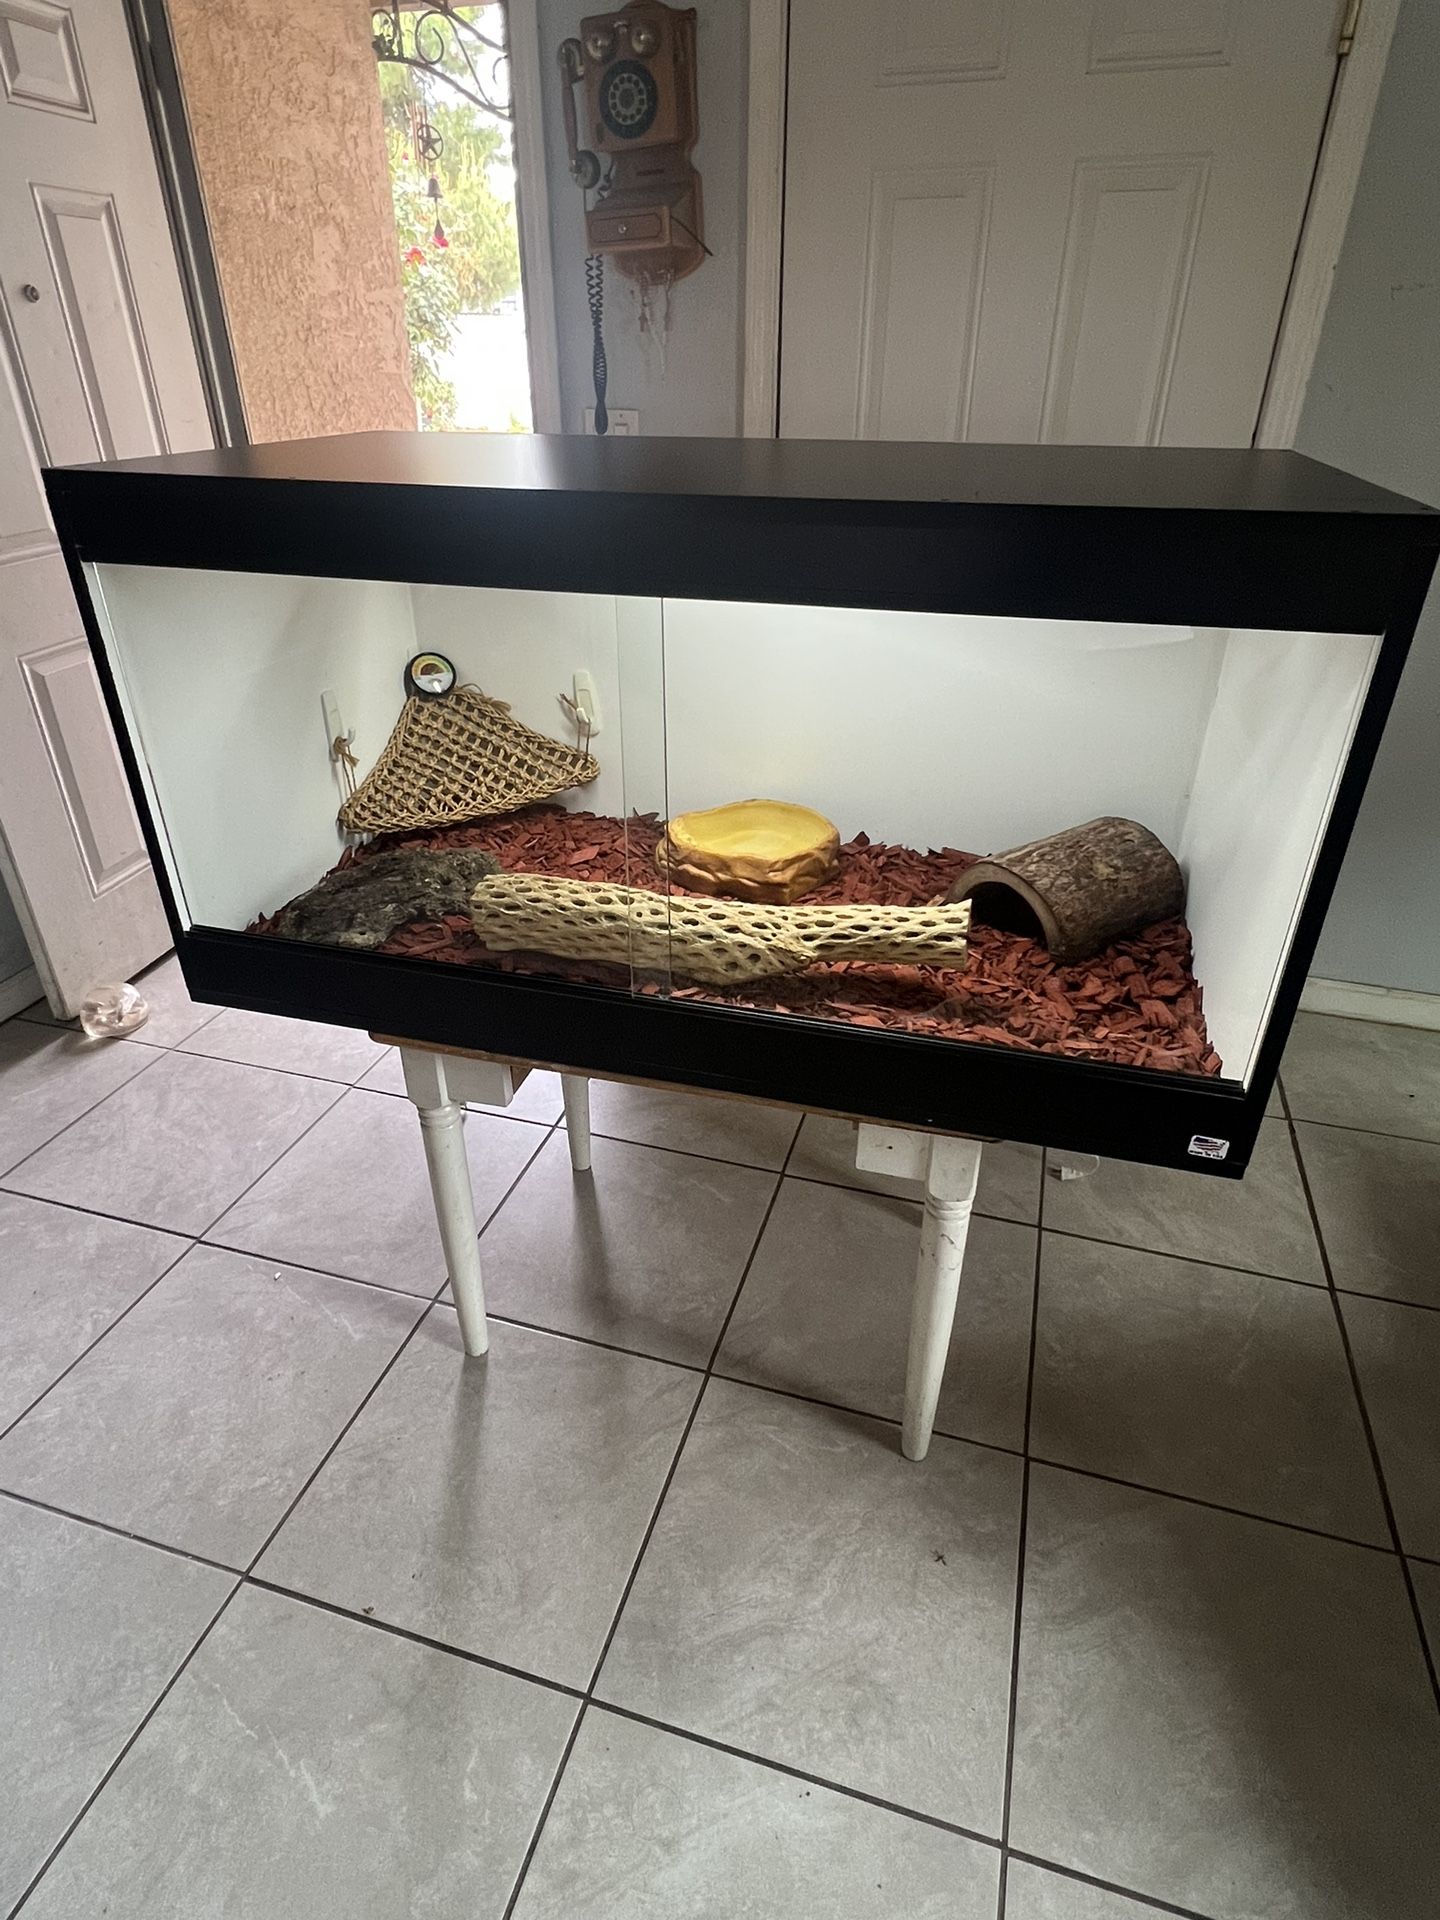 Reptile/Terrarium/Aquarium Melamine Front Opening  Tank/Enclosure 4x2x2 With Full Set Up *** Great Condition *** *** Today Only $275 ***